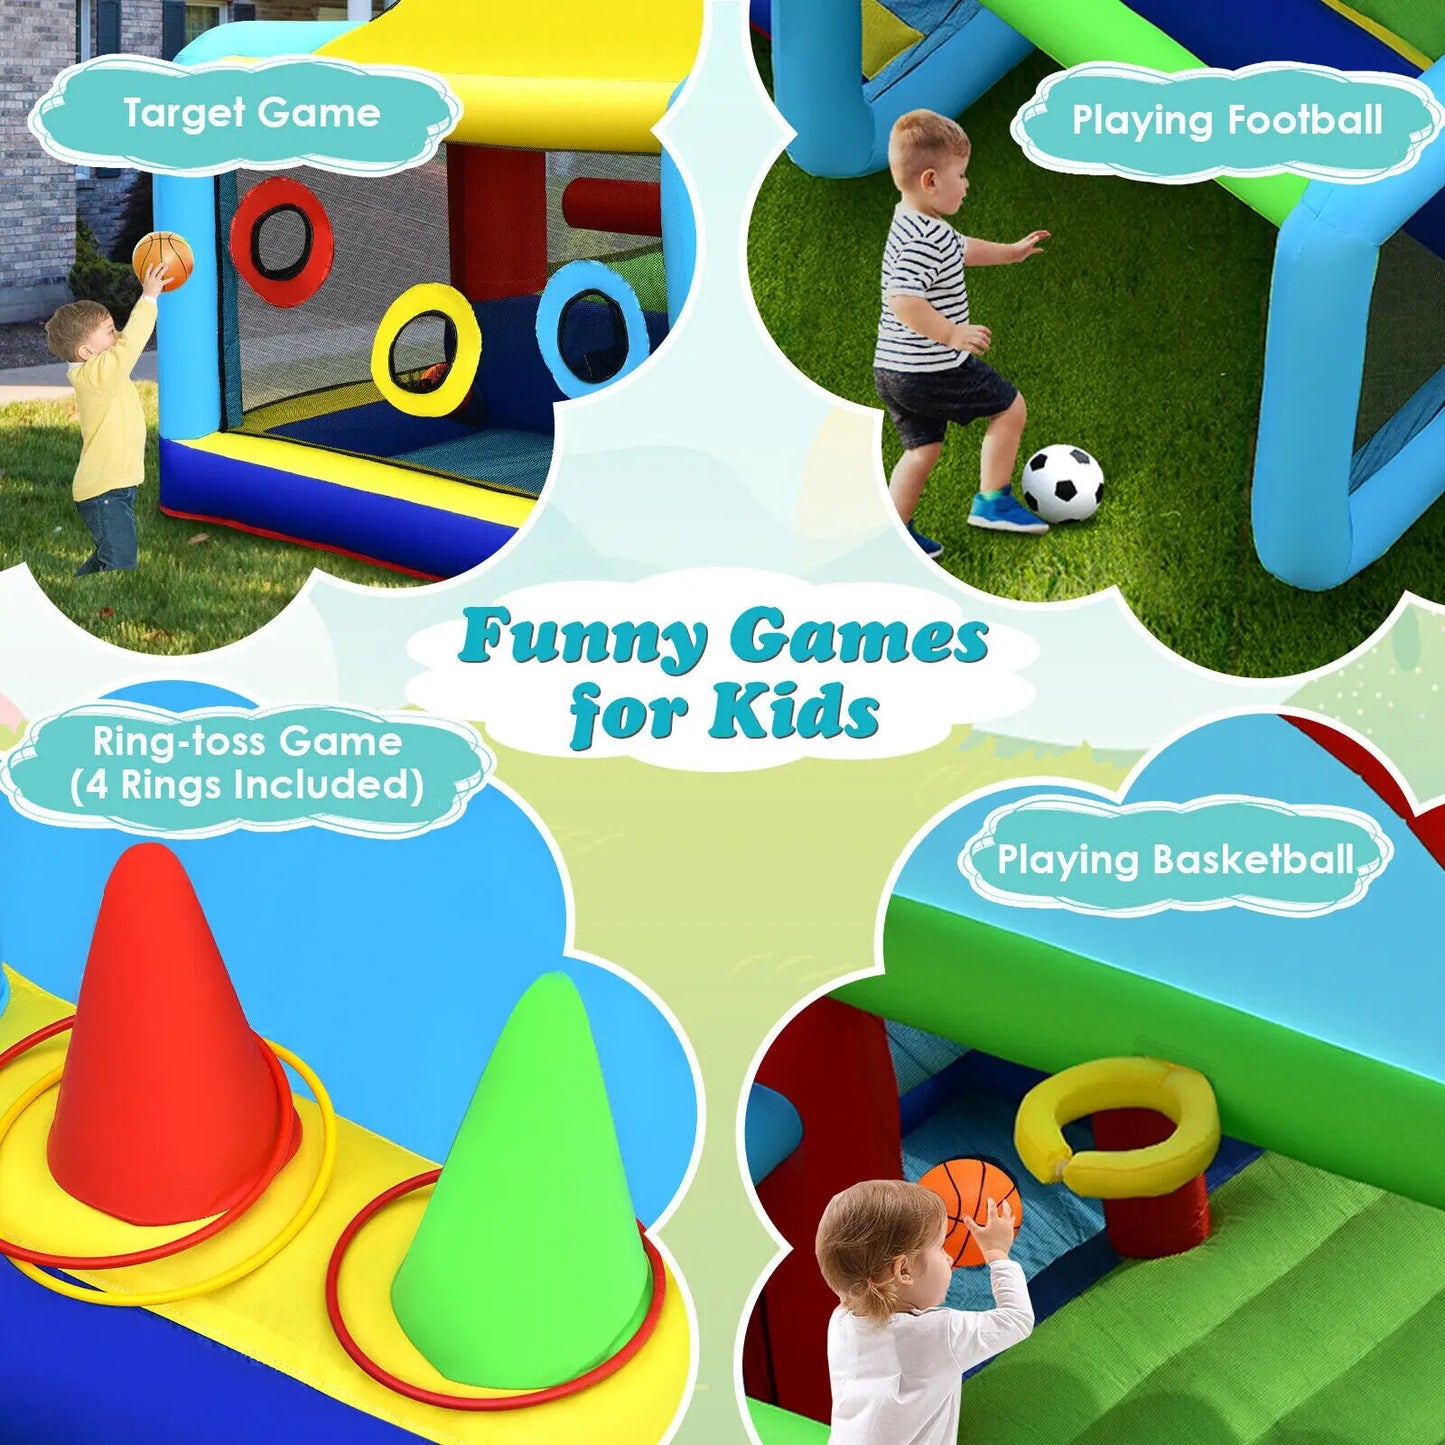 Inflatable Bouncy House (Without Blower)